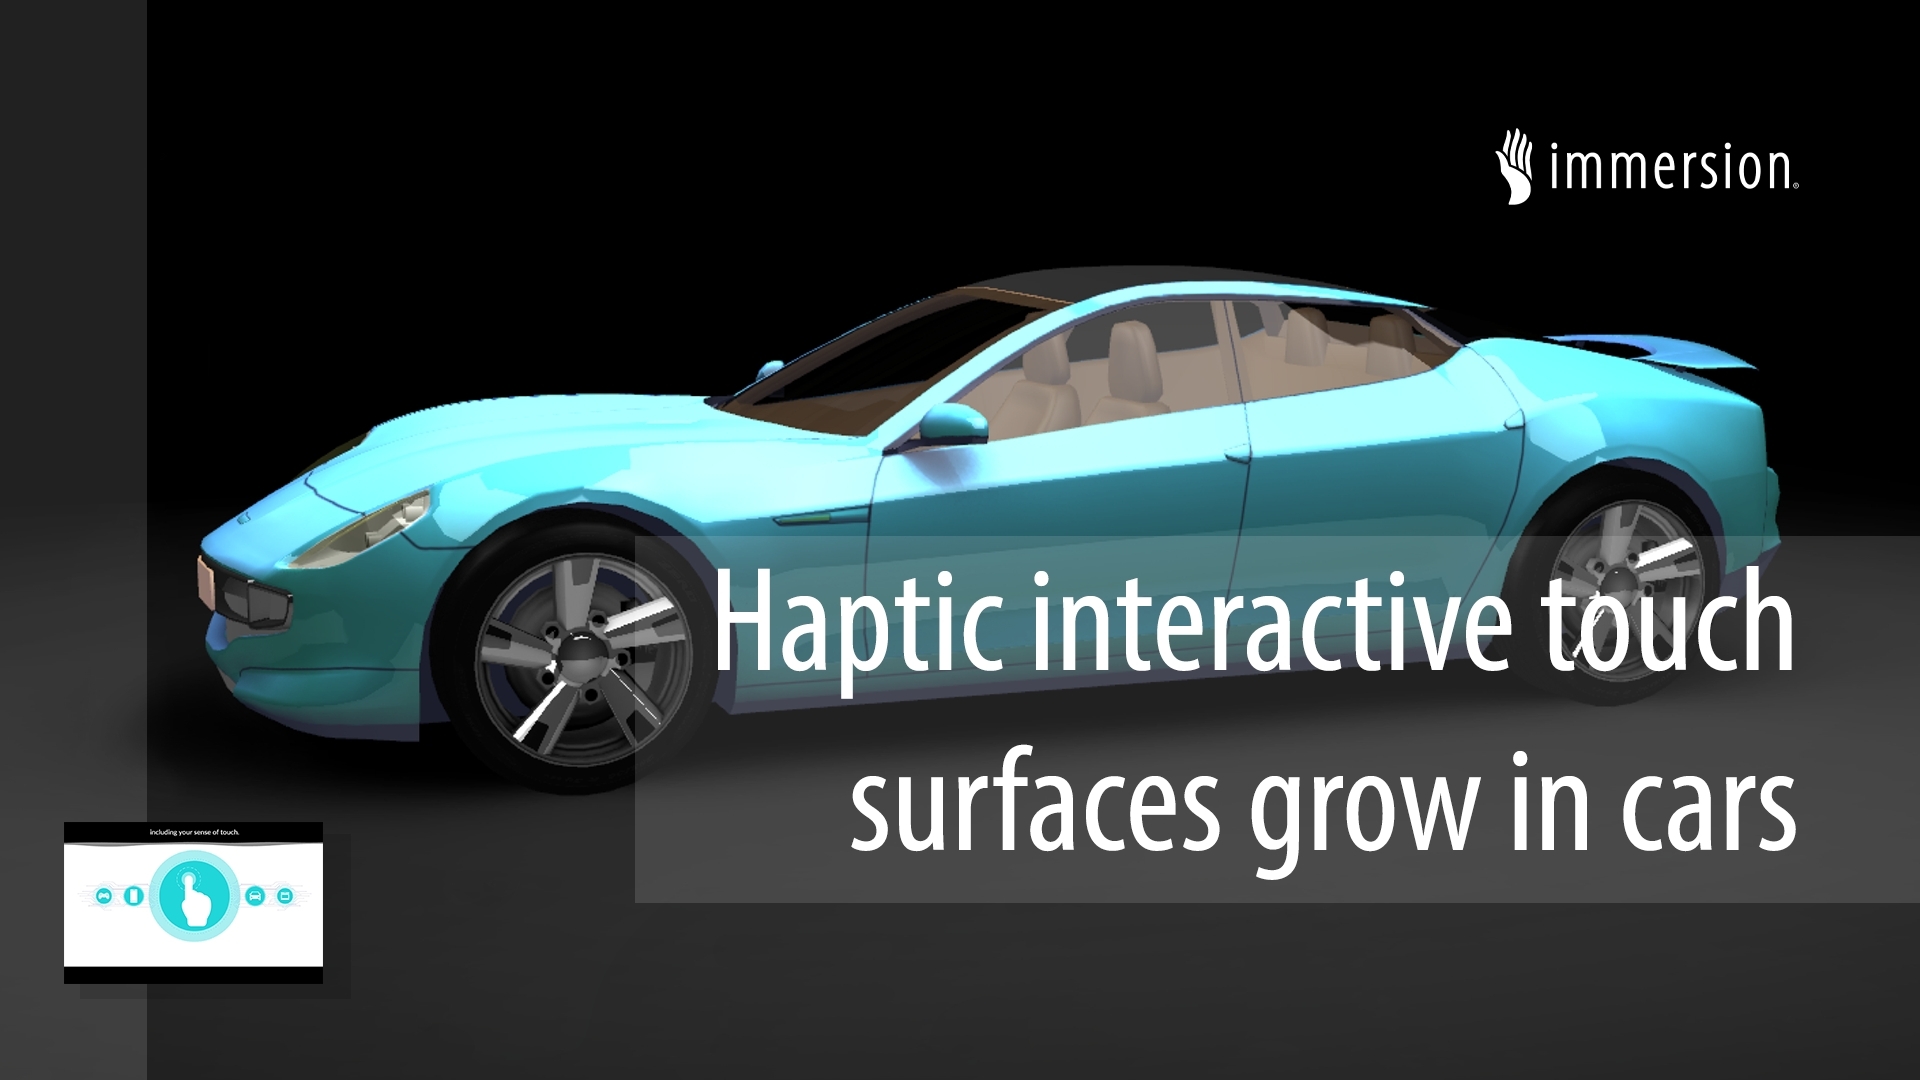 Faurecia and Immersion join hands for Haptic Automotive Technologies